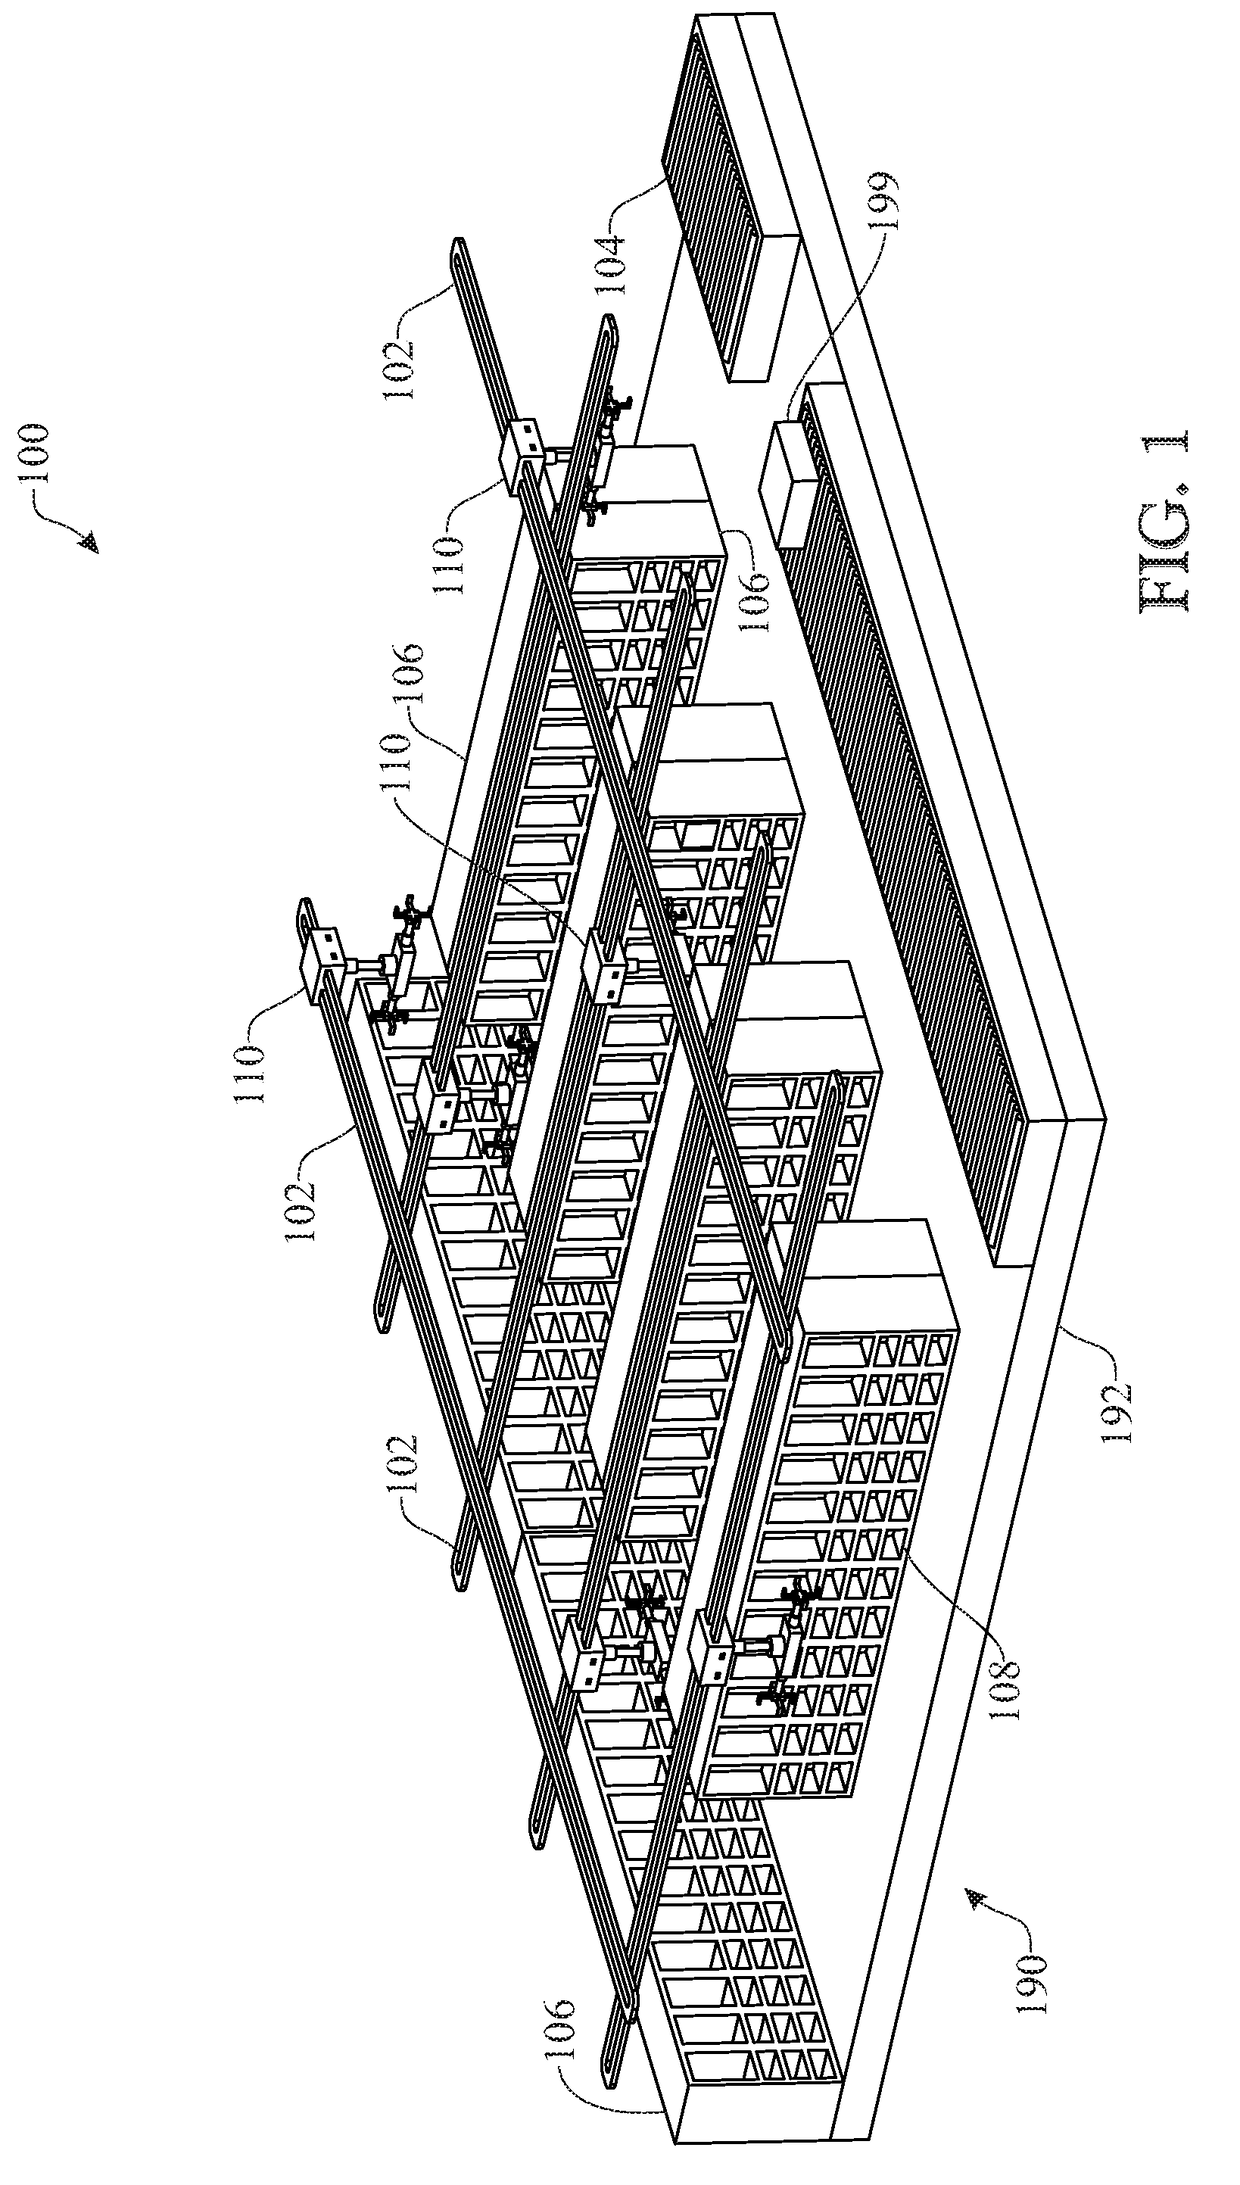 System and method for overhead warehousing